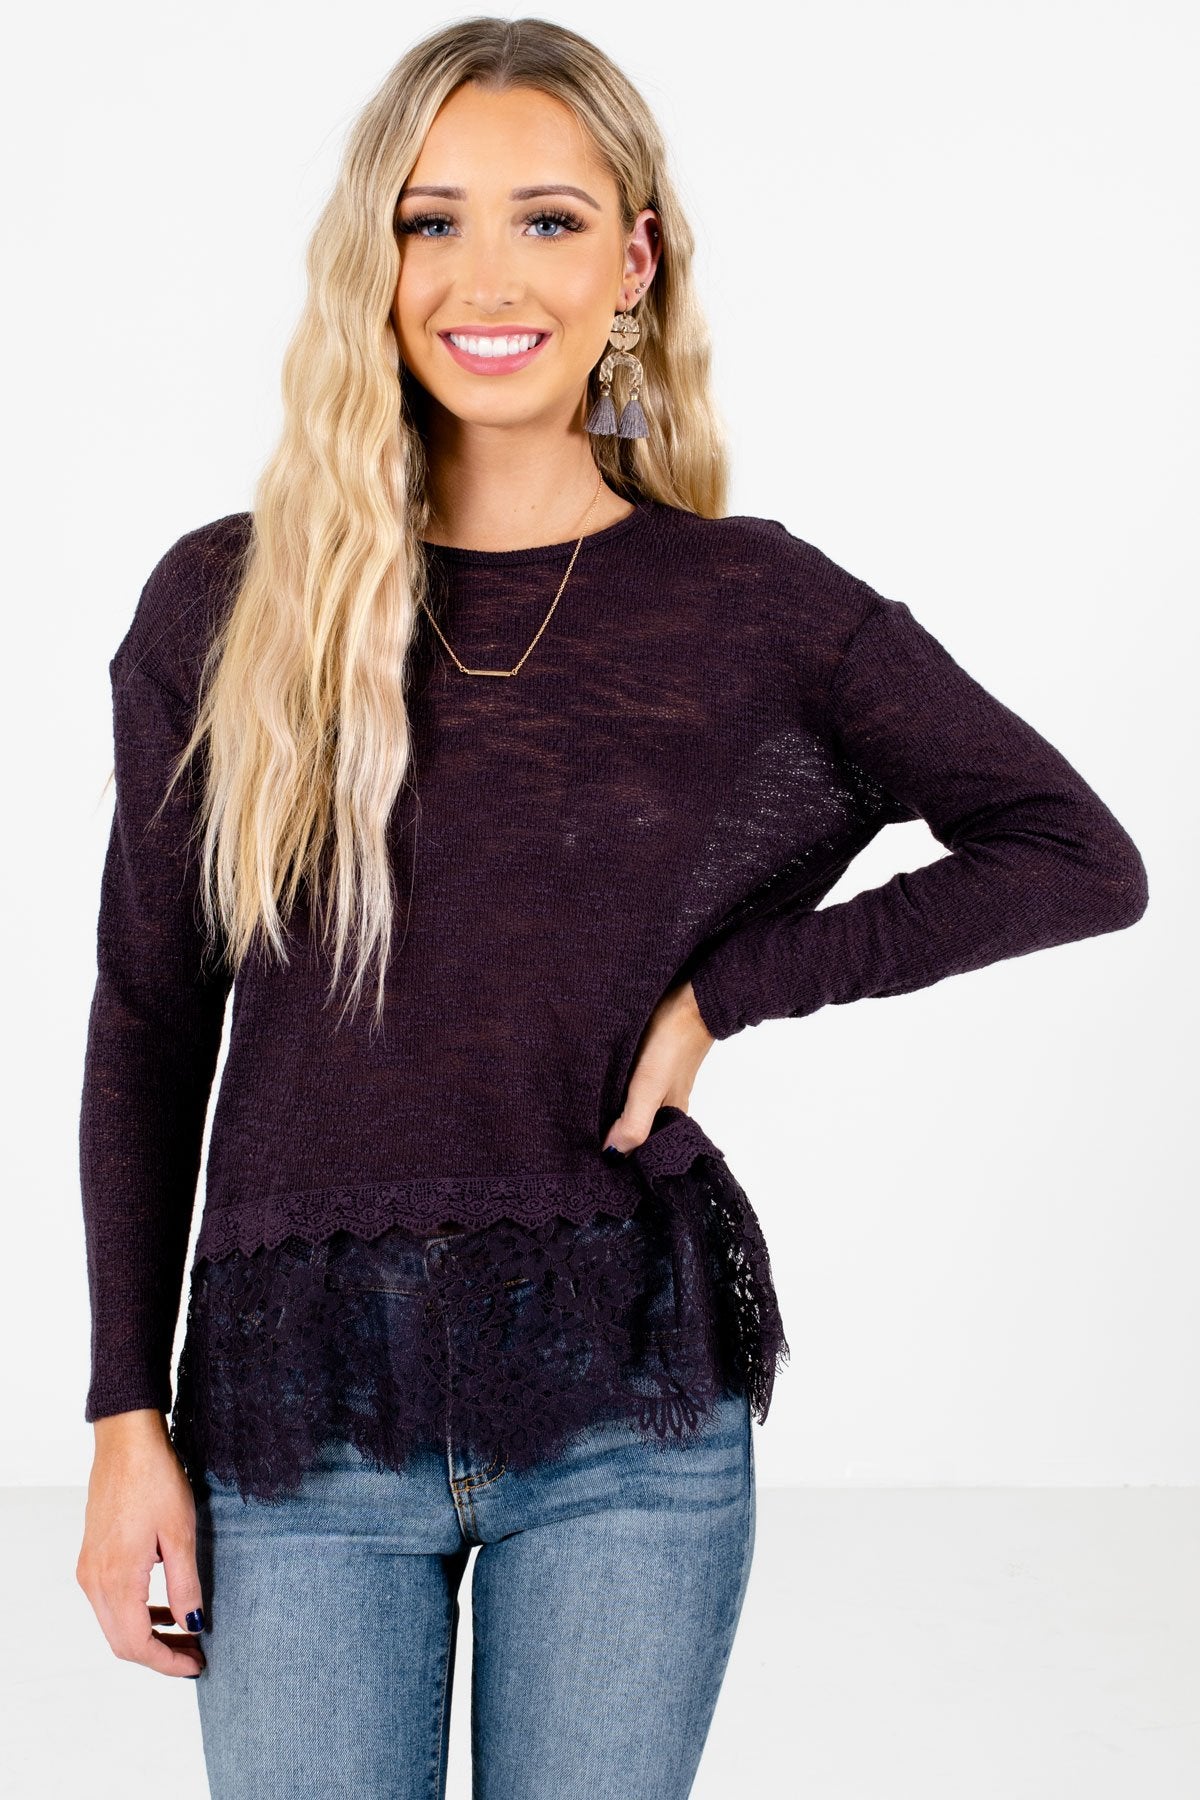 Purple Semi-Sheer Knit Material Boutique Tops for Women